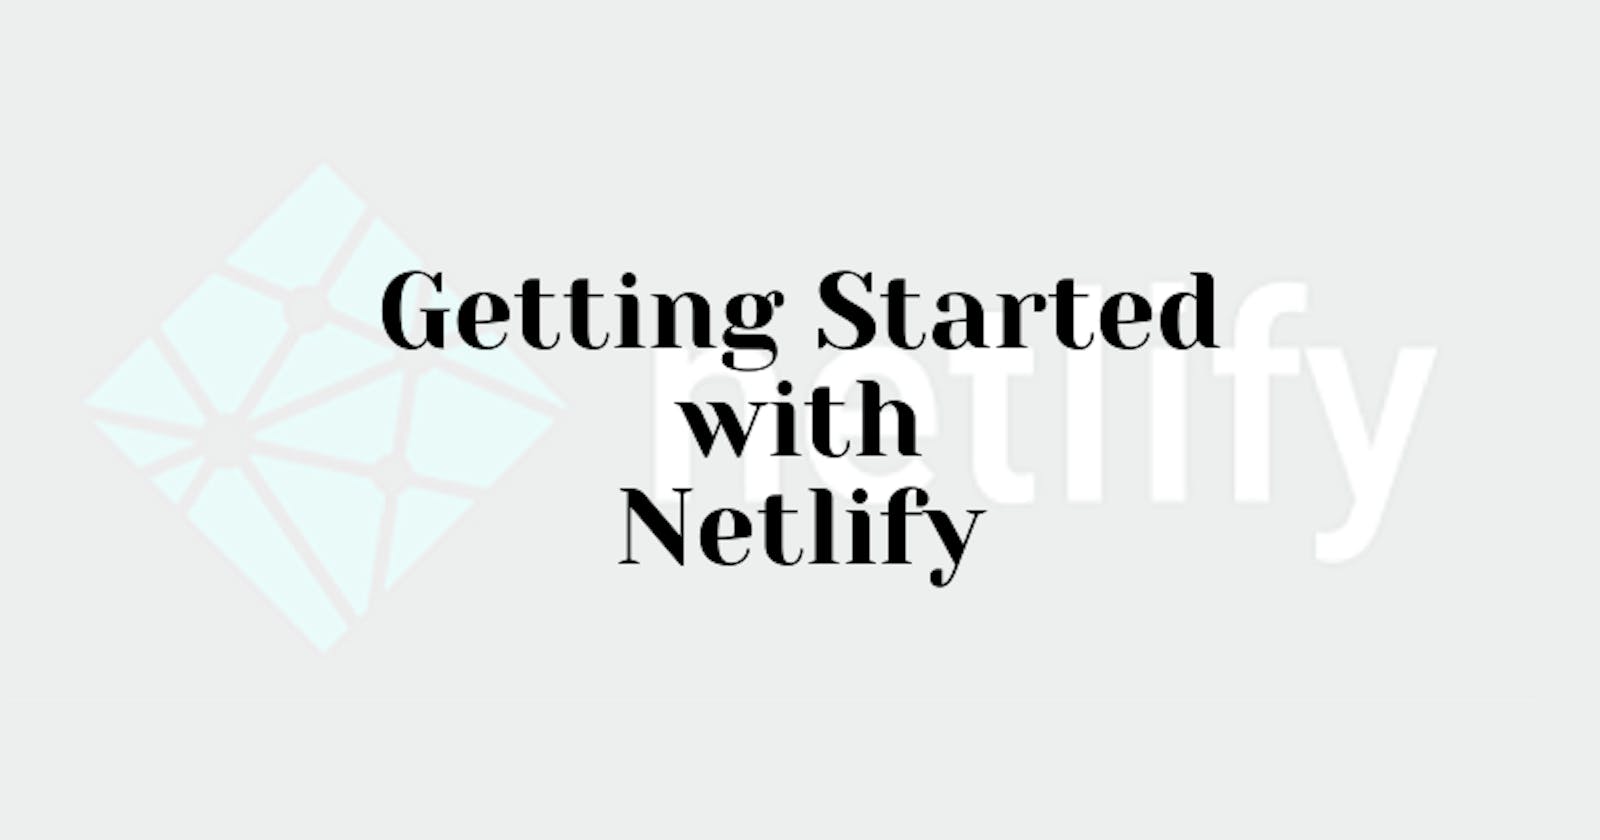 Getting Started with Netlify